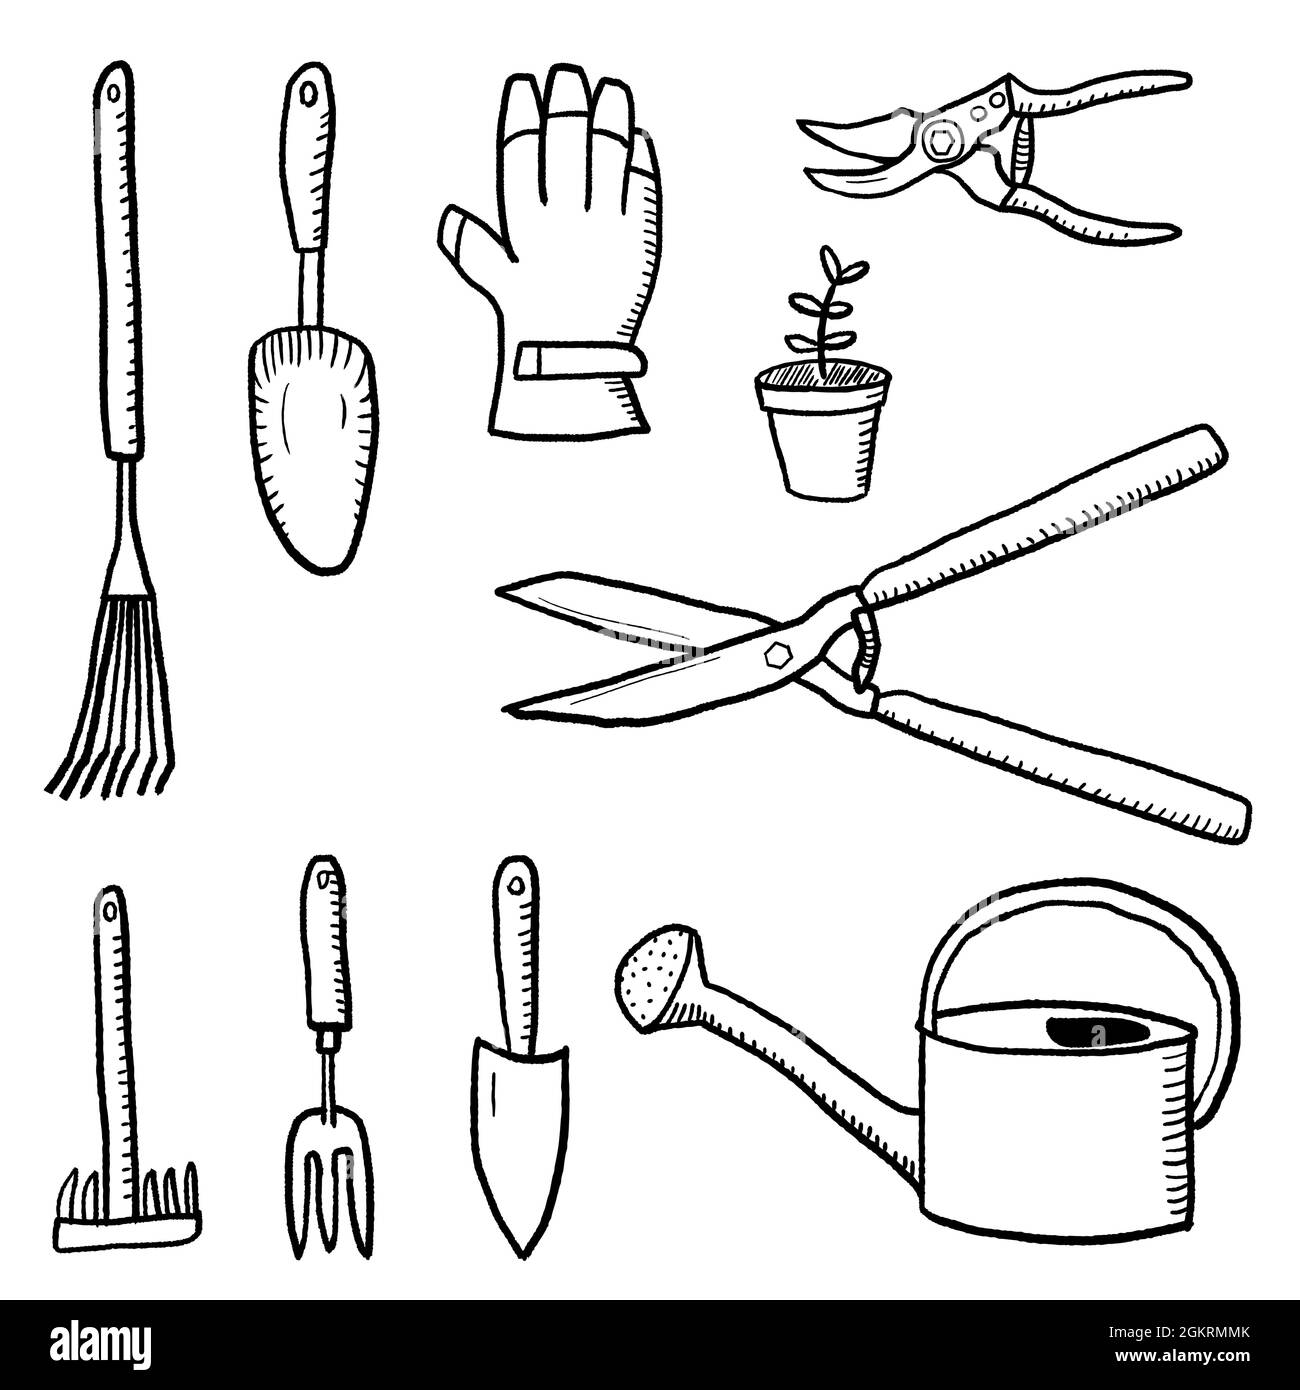 Gardening tools doodle style illustration. Garden hobby equipment isolated vector objects. Stock Vector